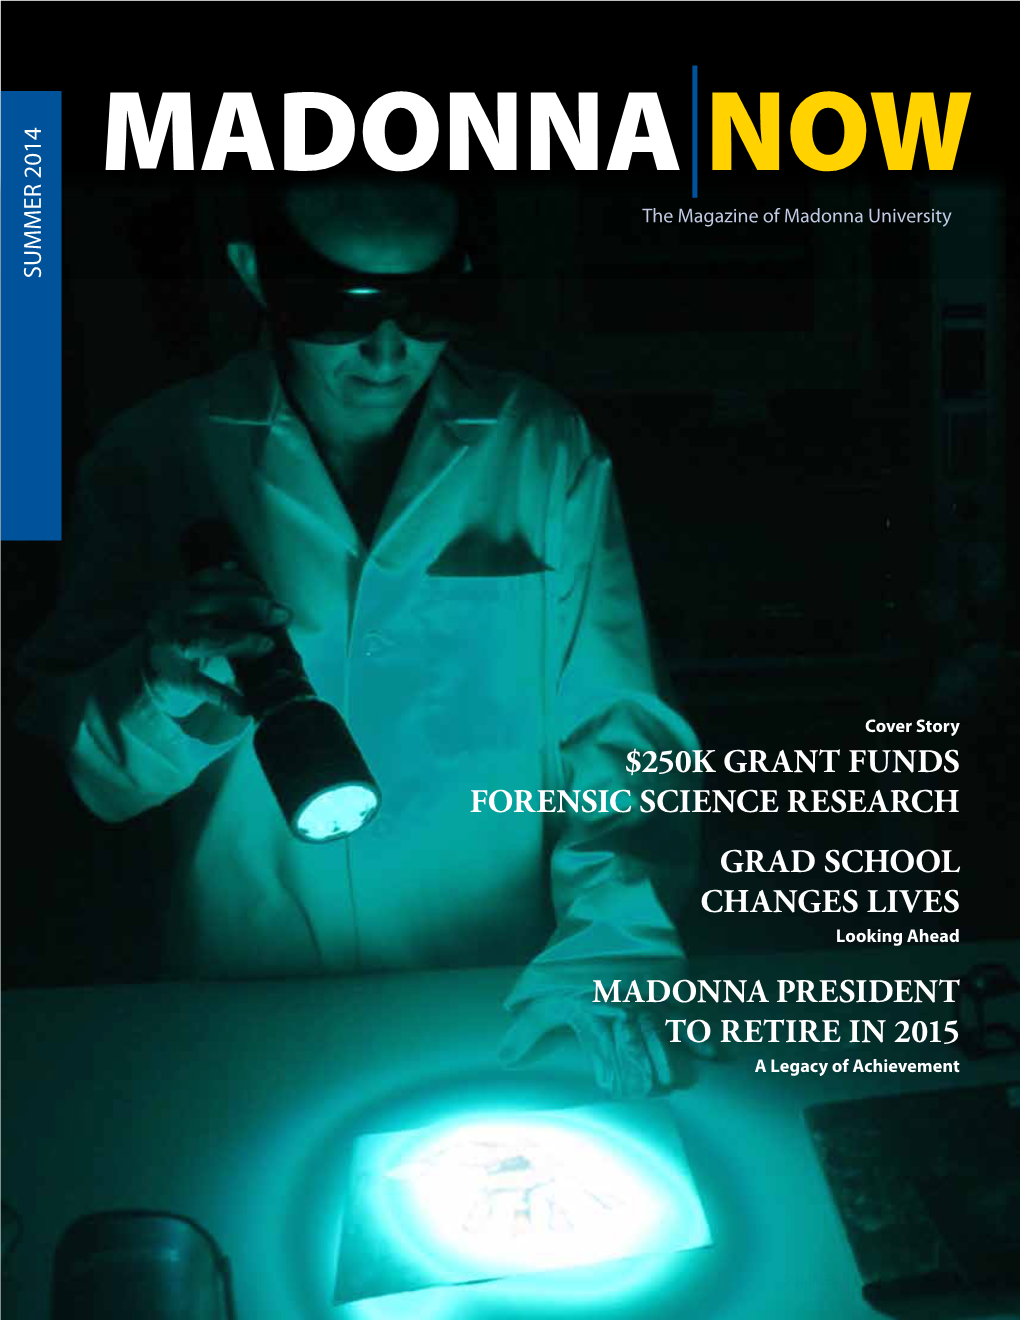 $250K GRANT FUNDS FORENSIC SCIENCE RESEARCH GRAD SCHOOL CHANGES LIVES Looking Ahead MADONNA PRESIDENT to RETIRE in 2015 a Legacy of Achievement